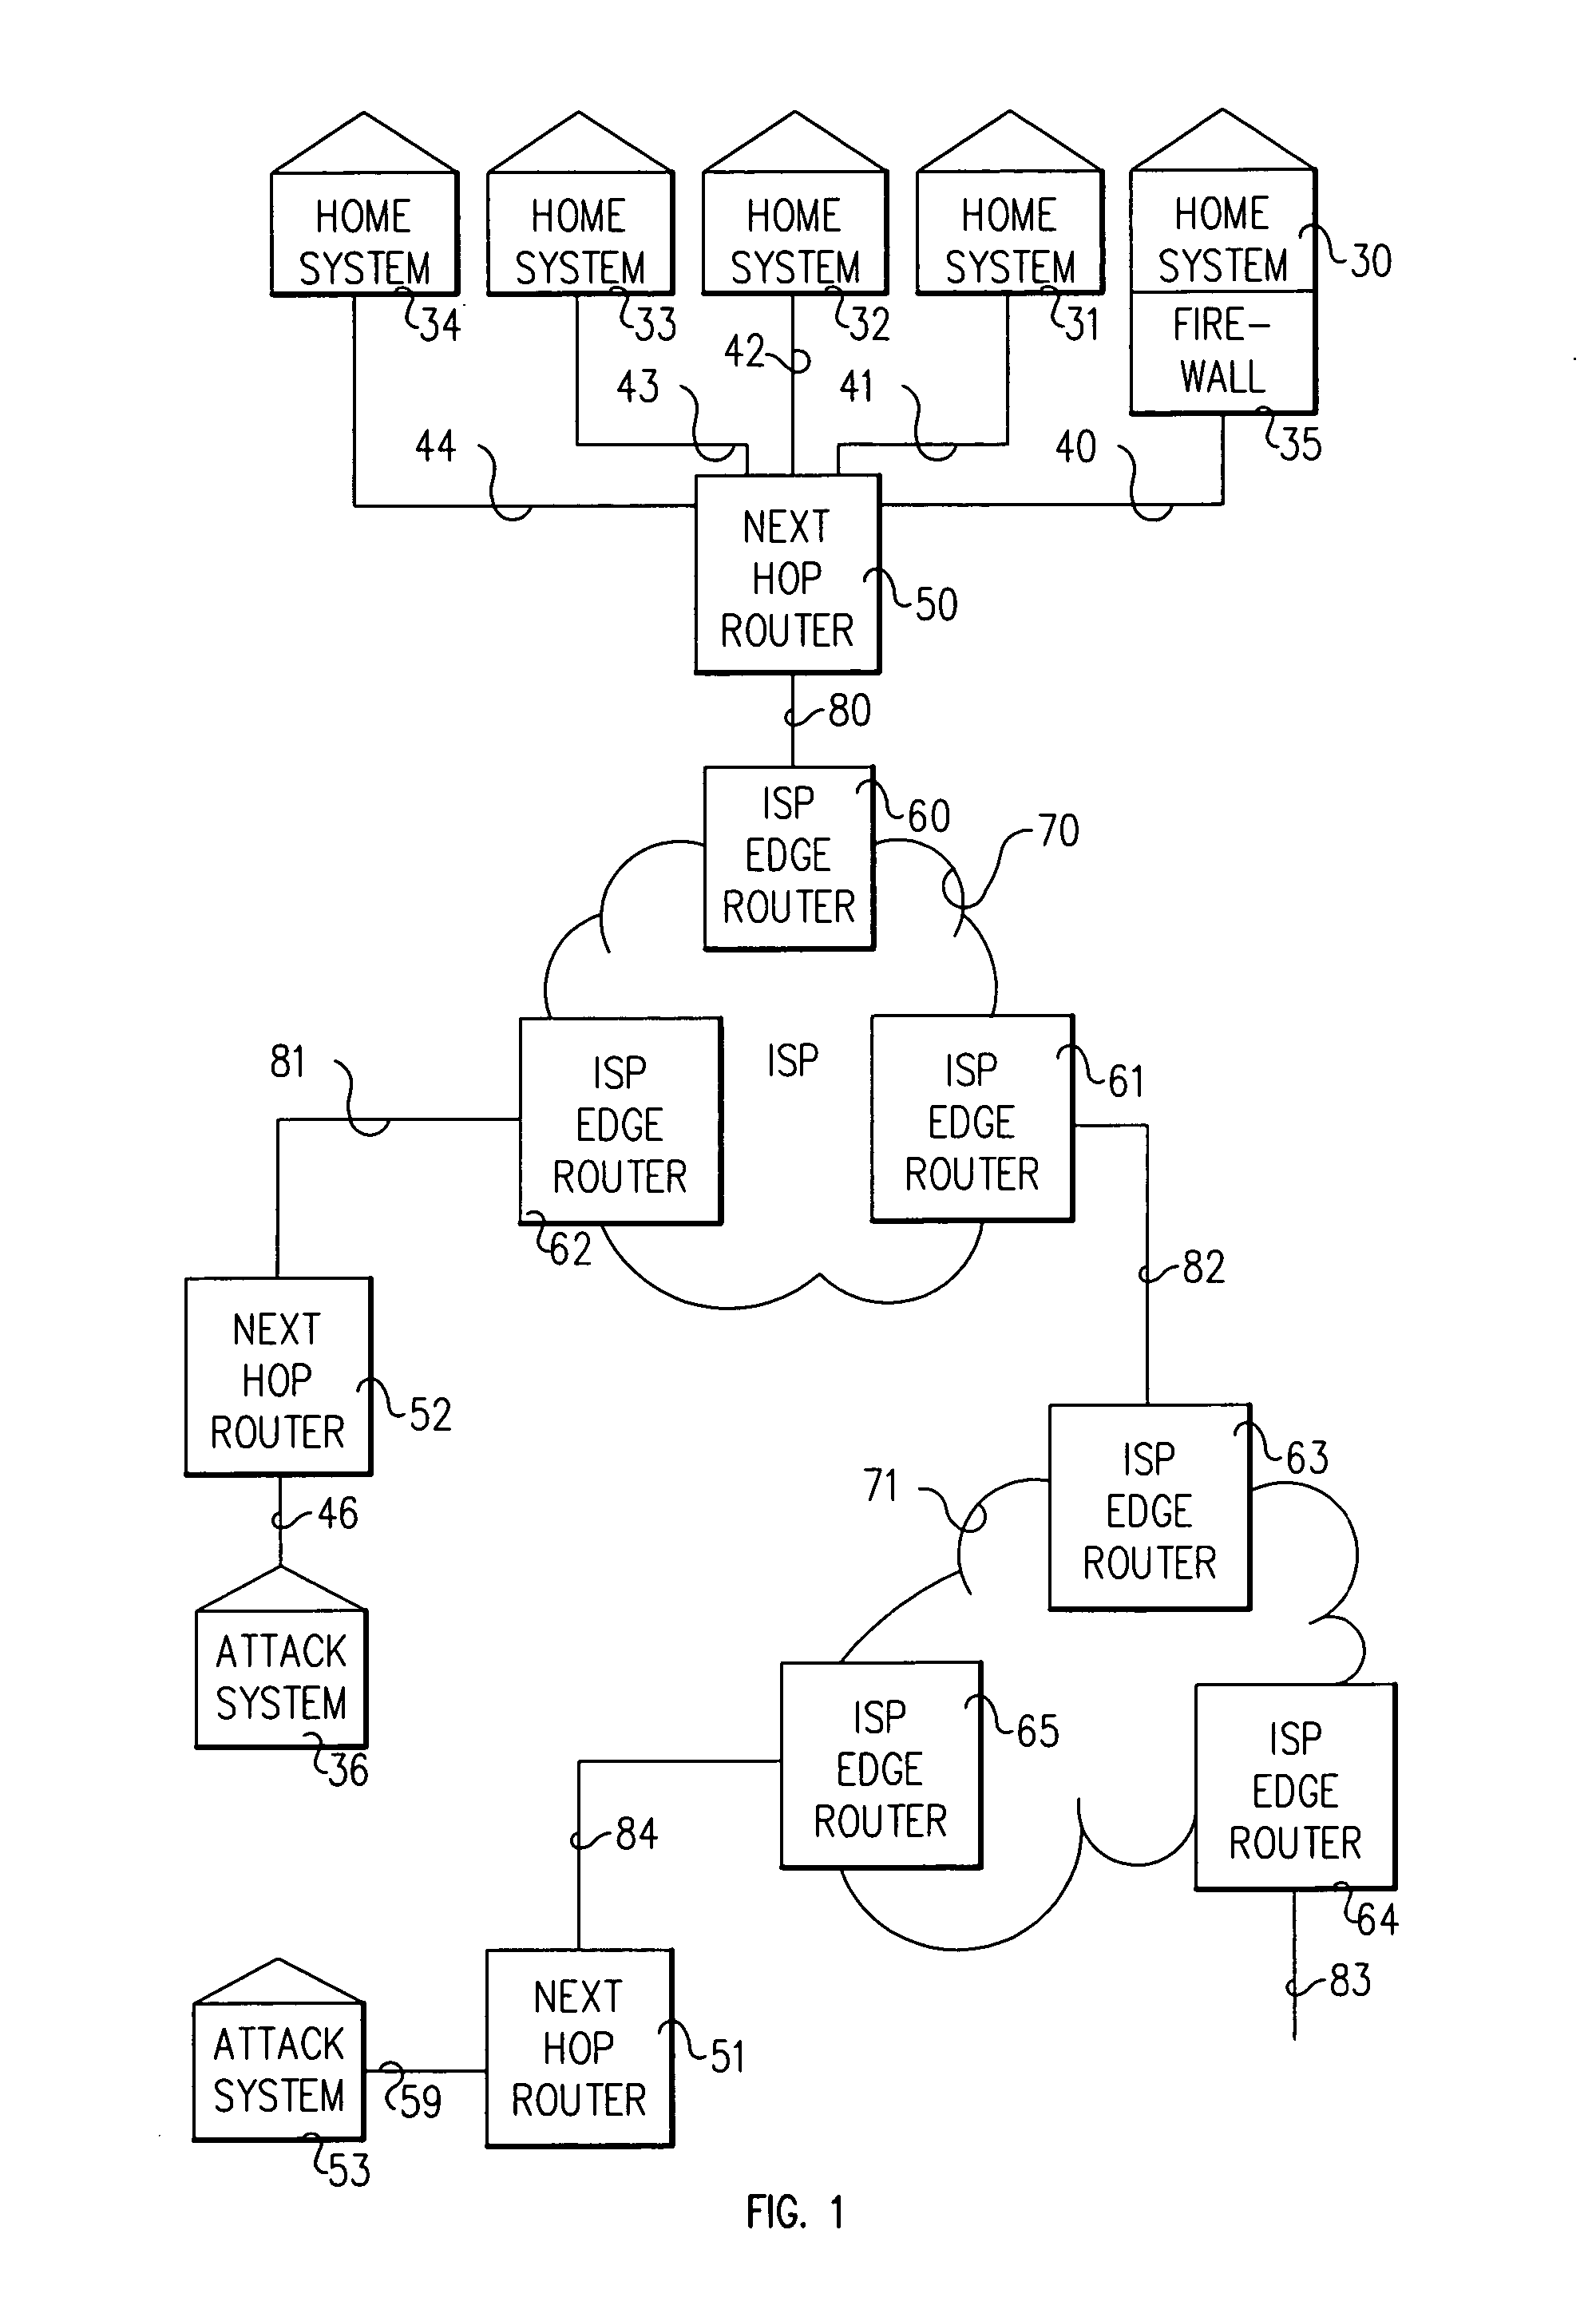 System and method for detection and mitigation of distributed denial of service attacks